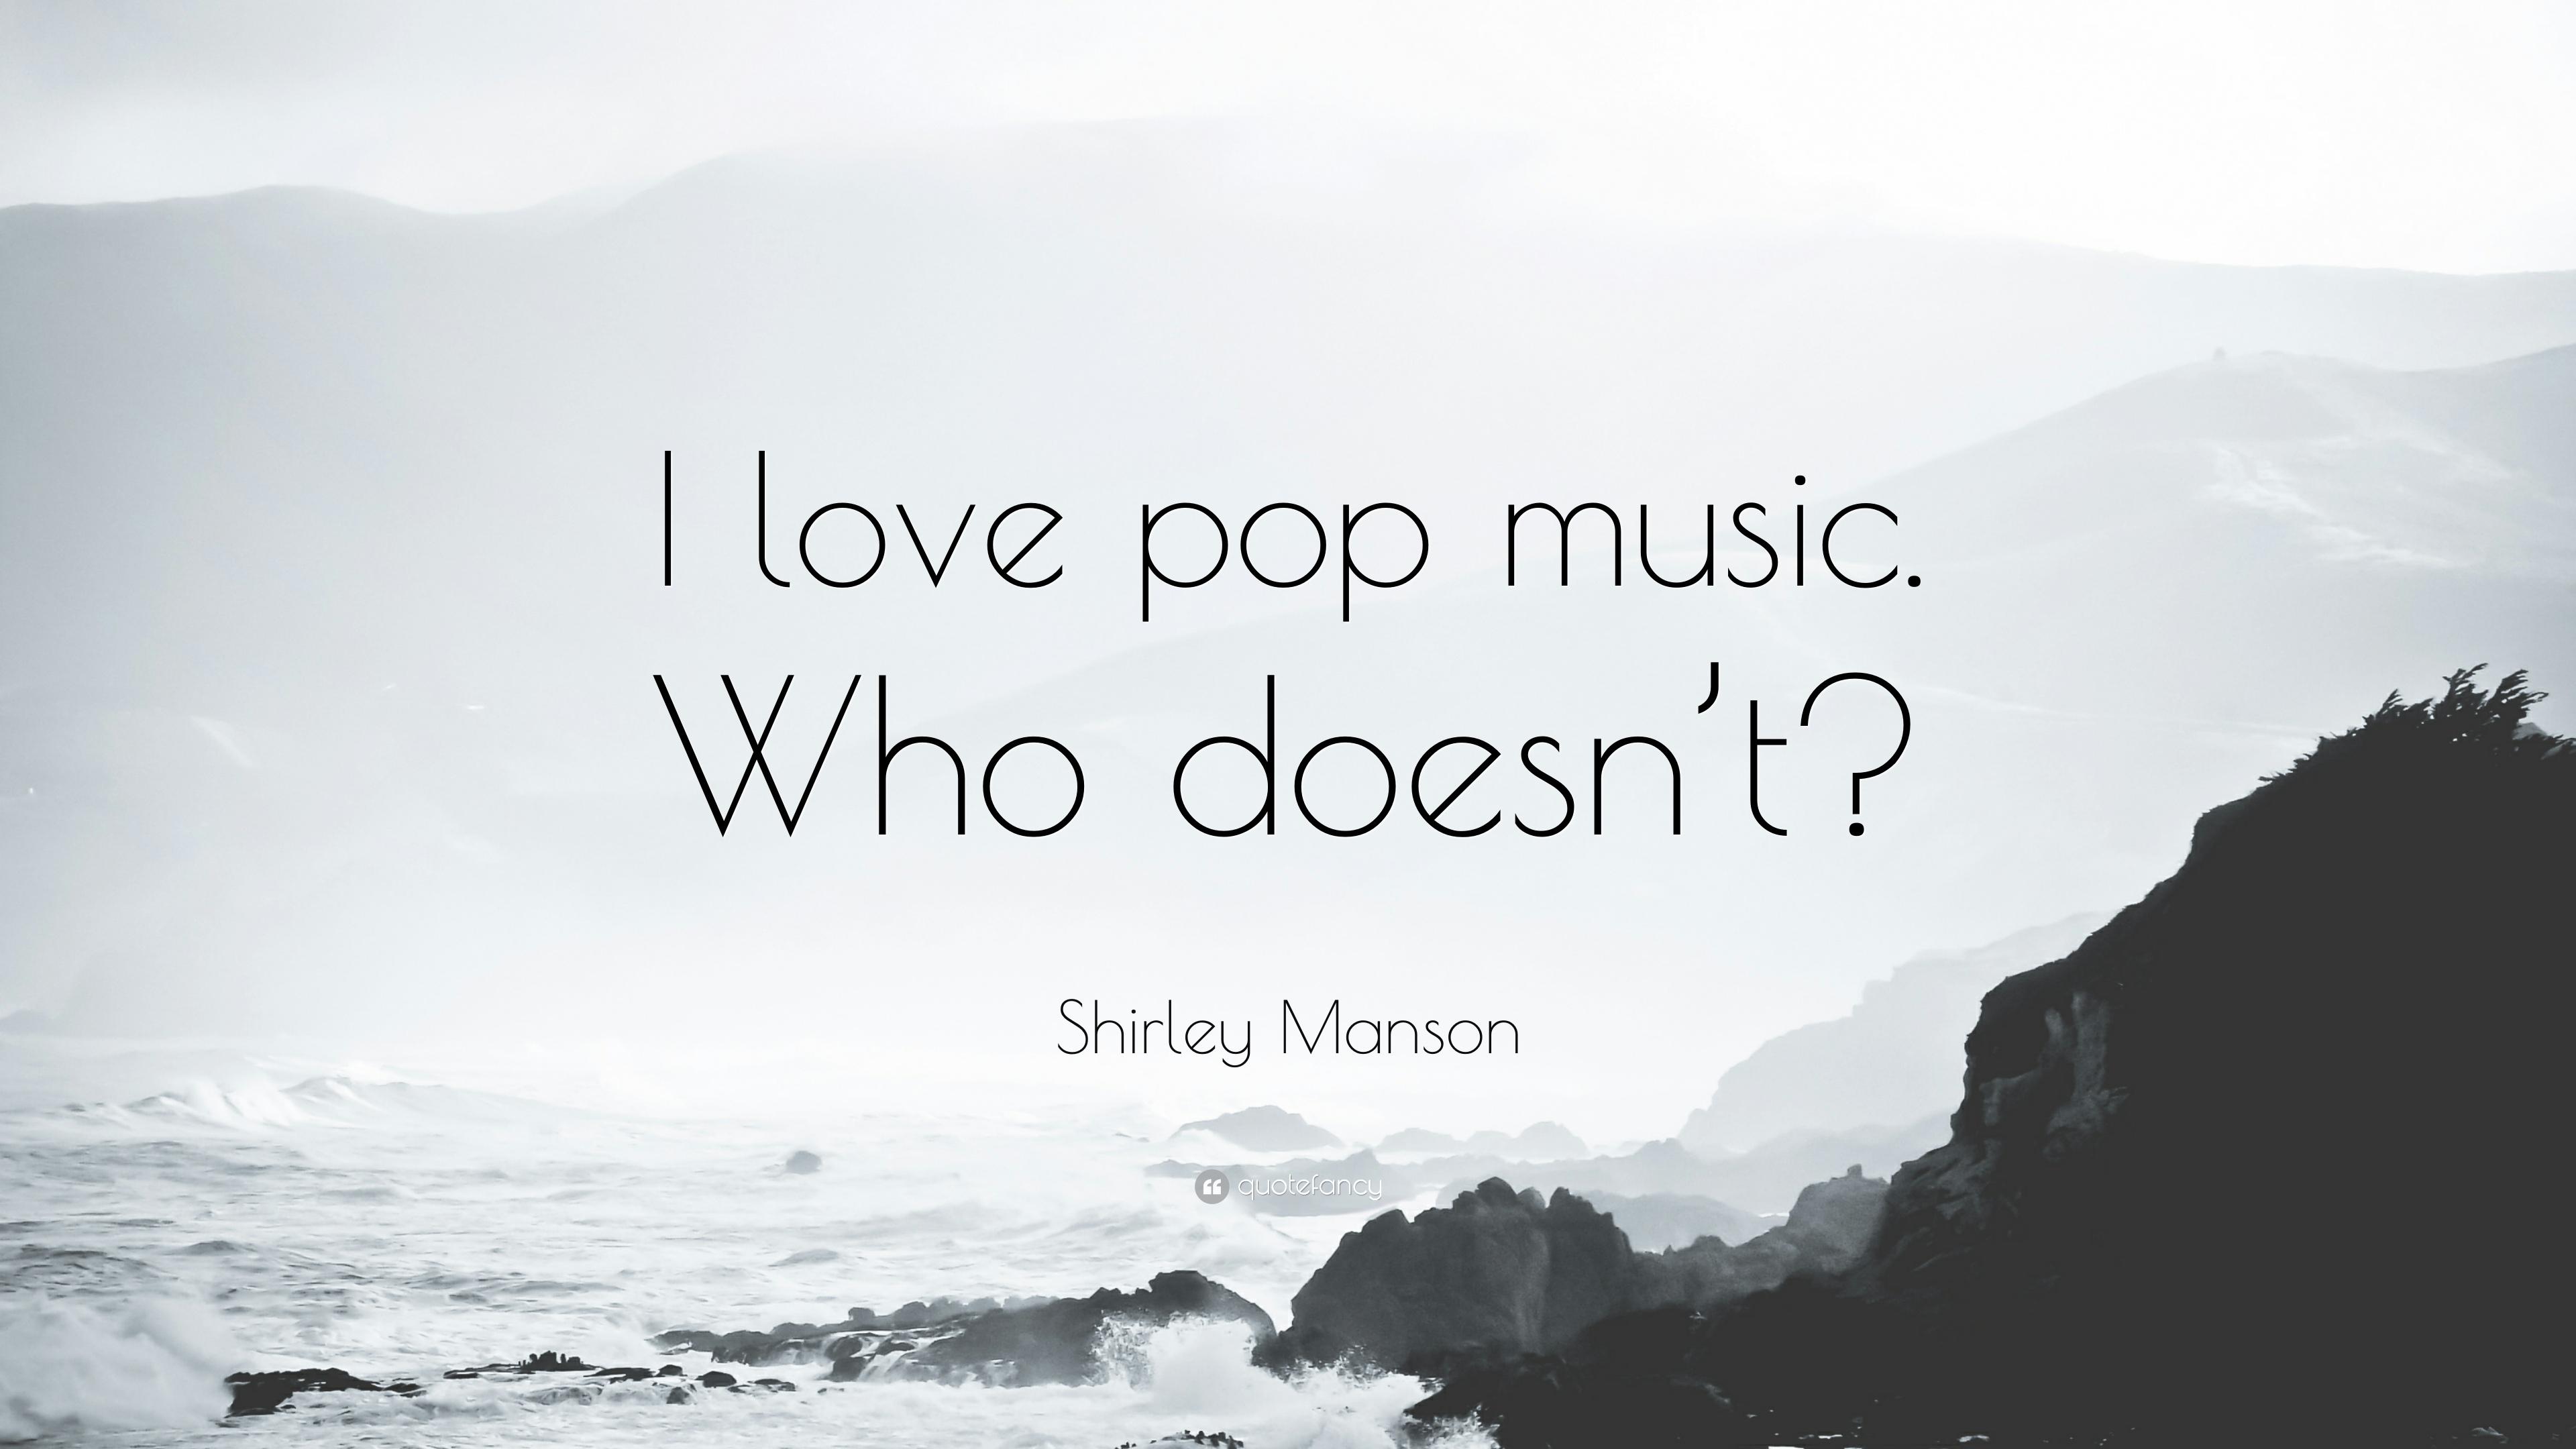 Shirley Manson Quote: “I love pop music. Who doesn't?” 9 wallpaper